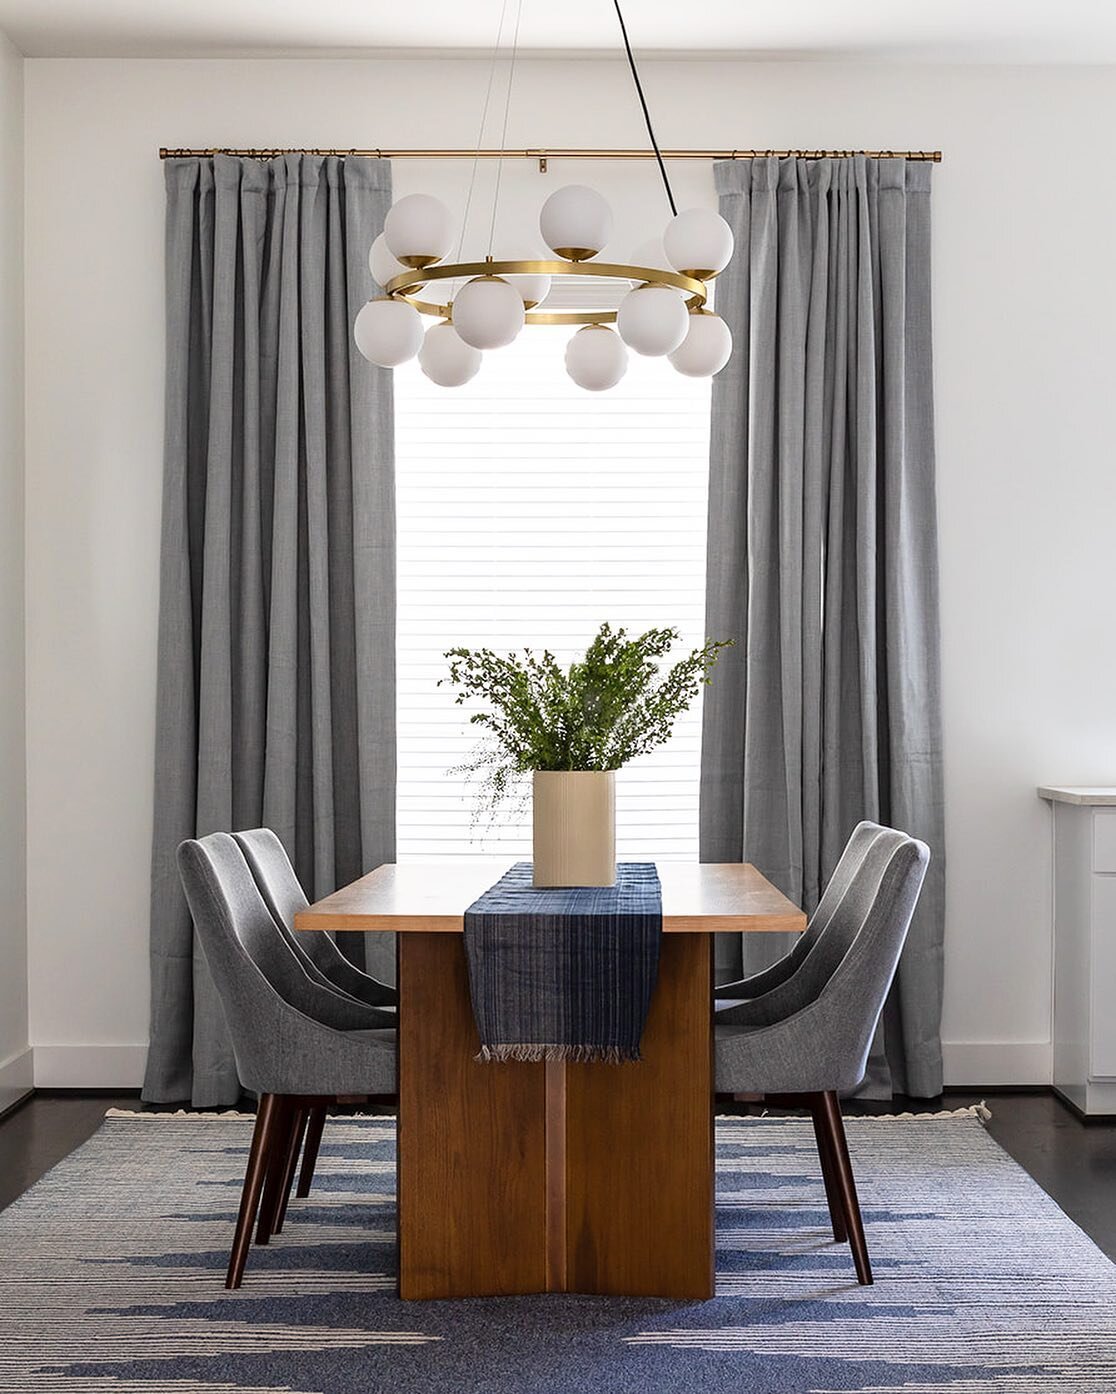 Modern &amp; symmetrical.

Dramatic drapes and a large area rug create a dining &ldquo;room&rdquo; in this open concept dining-kitchen-living space. Layering upholstered chairs, a modern wood table, and a statement chandelier bring it all together! ?